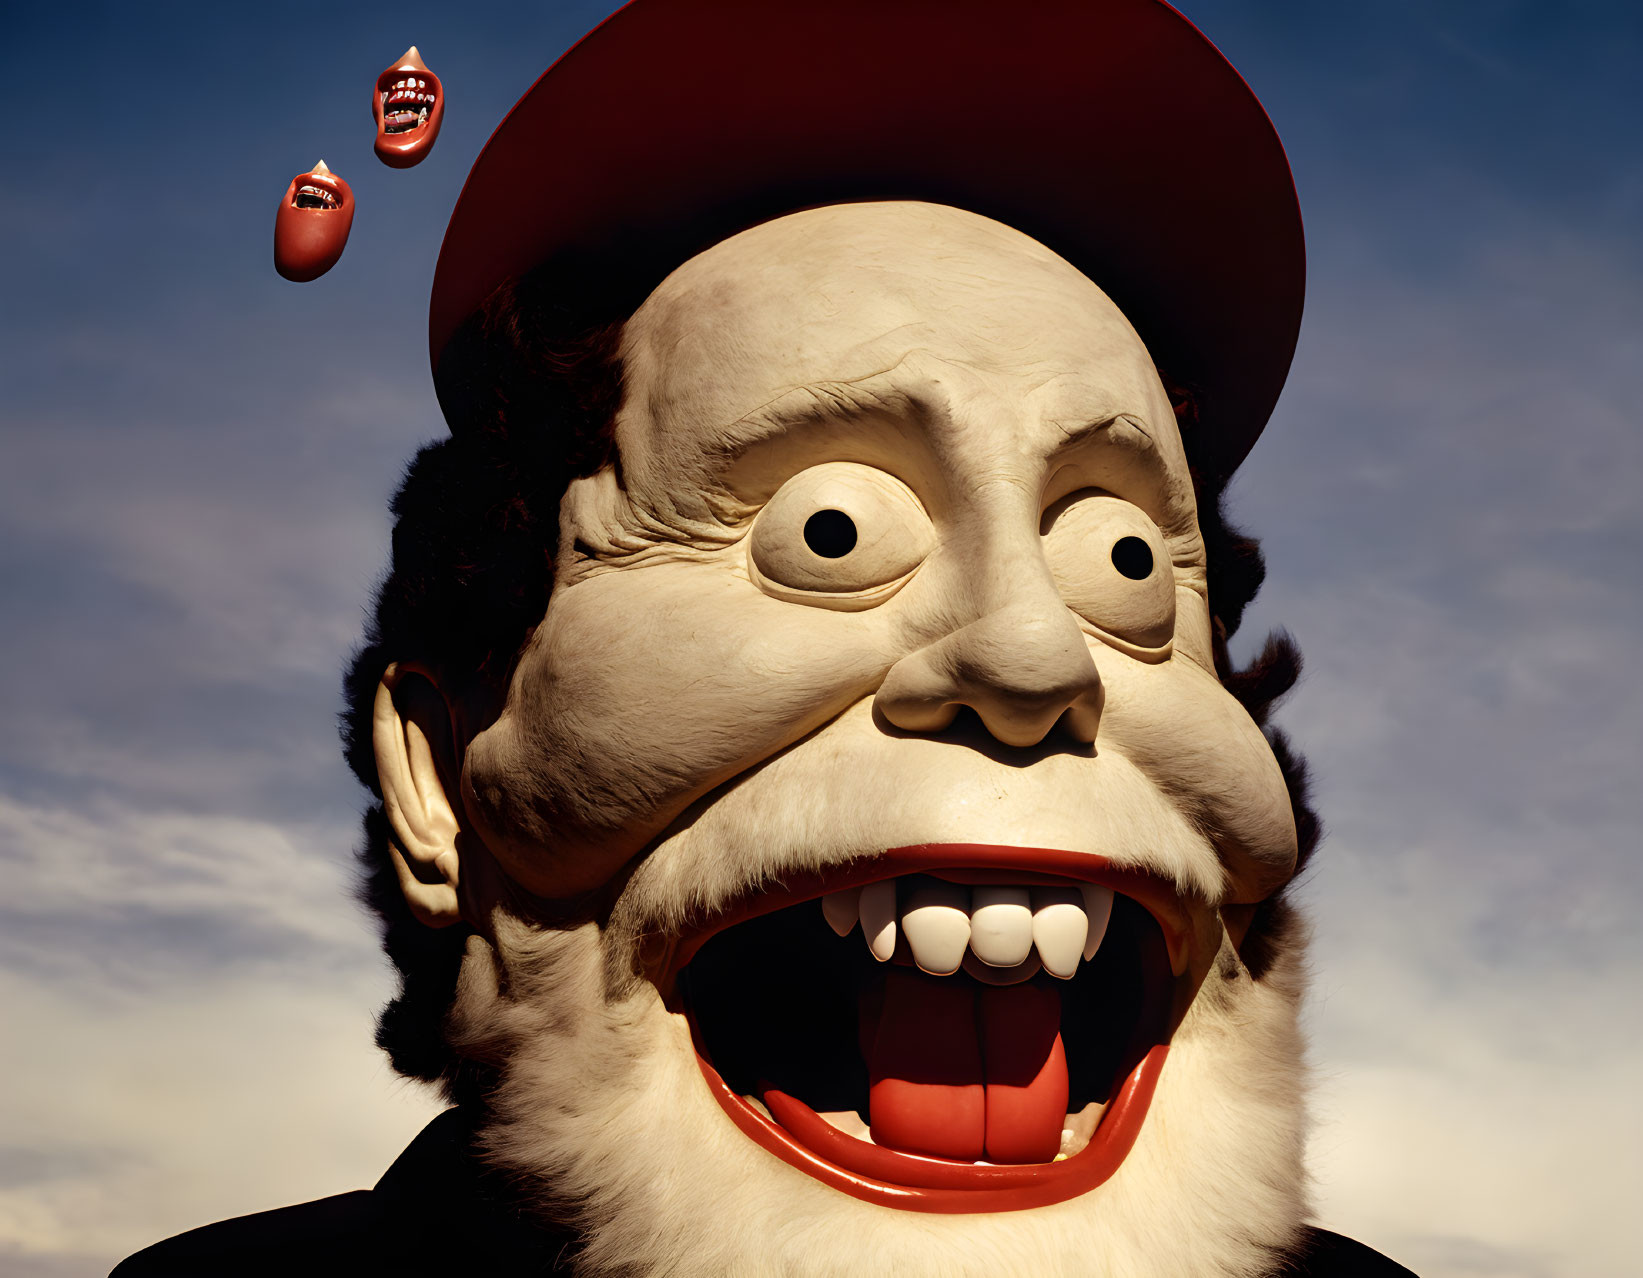 Gigantic surreal cartoon face with red cap and floating smaller face